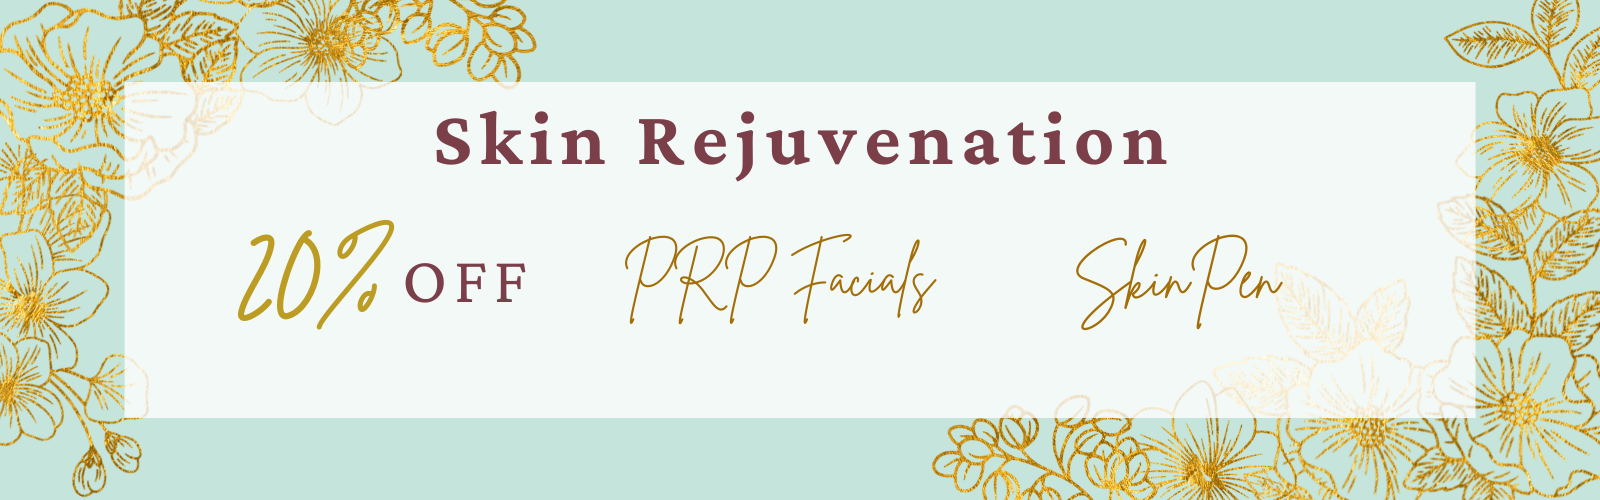 Save on PRP Facials and Skin Pen